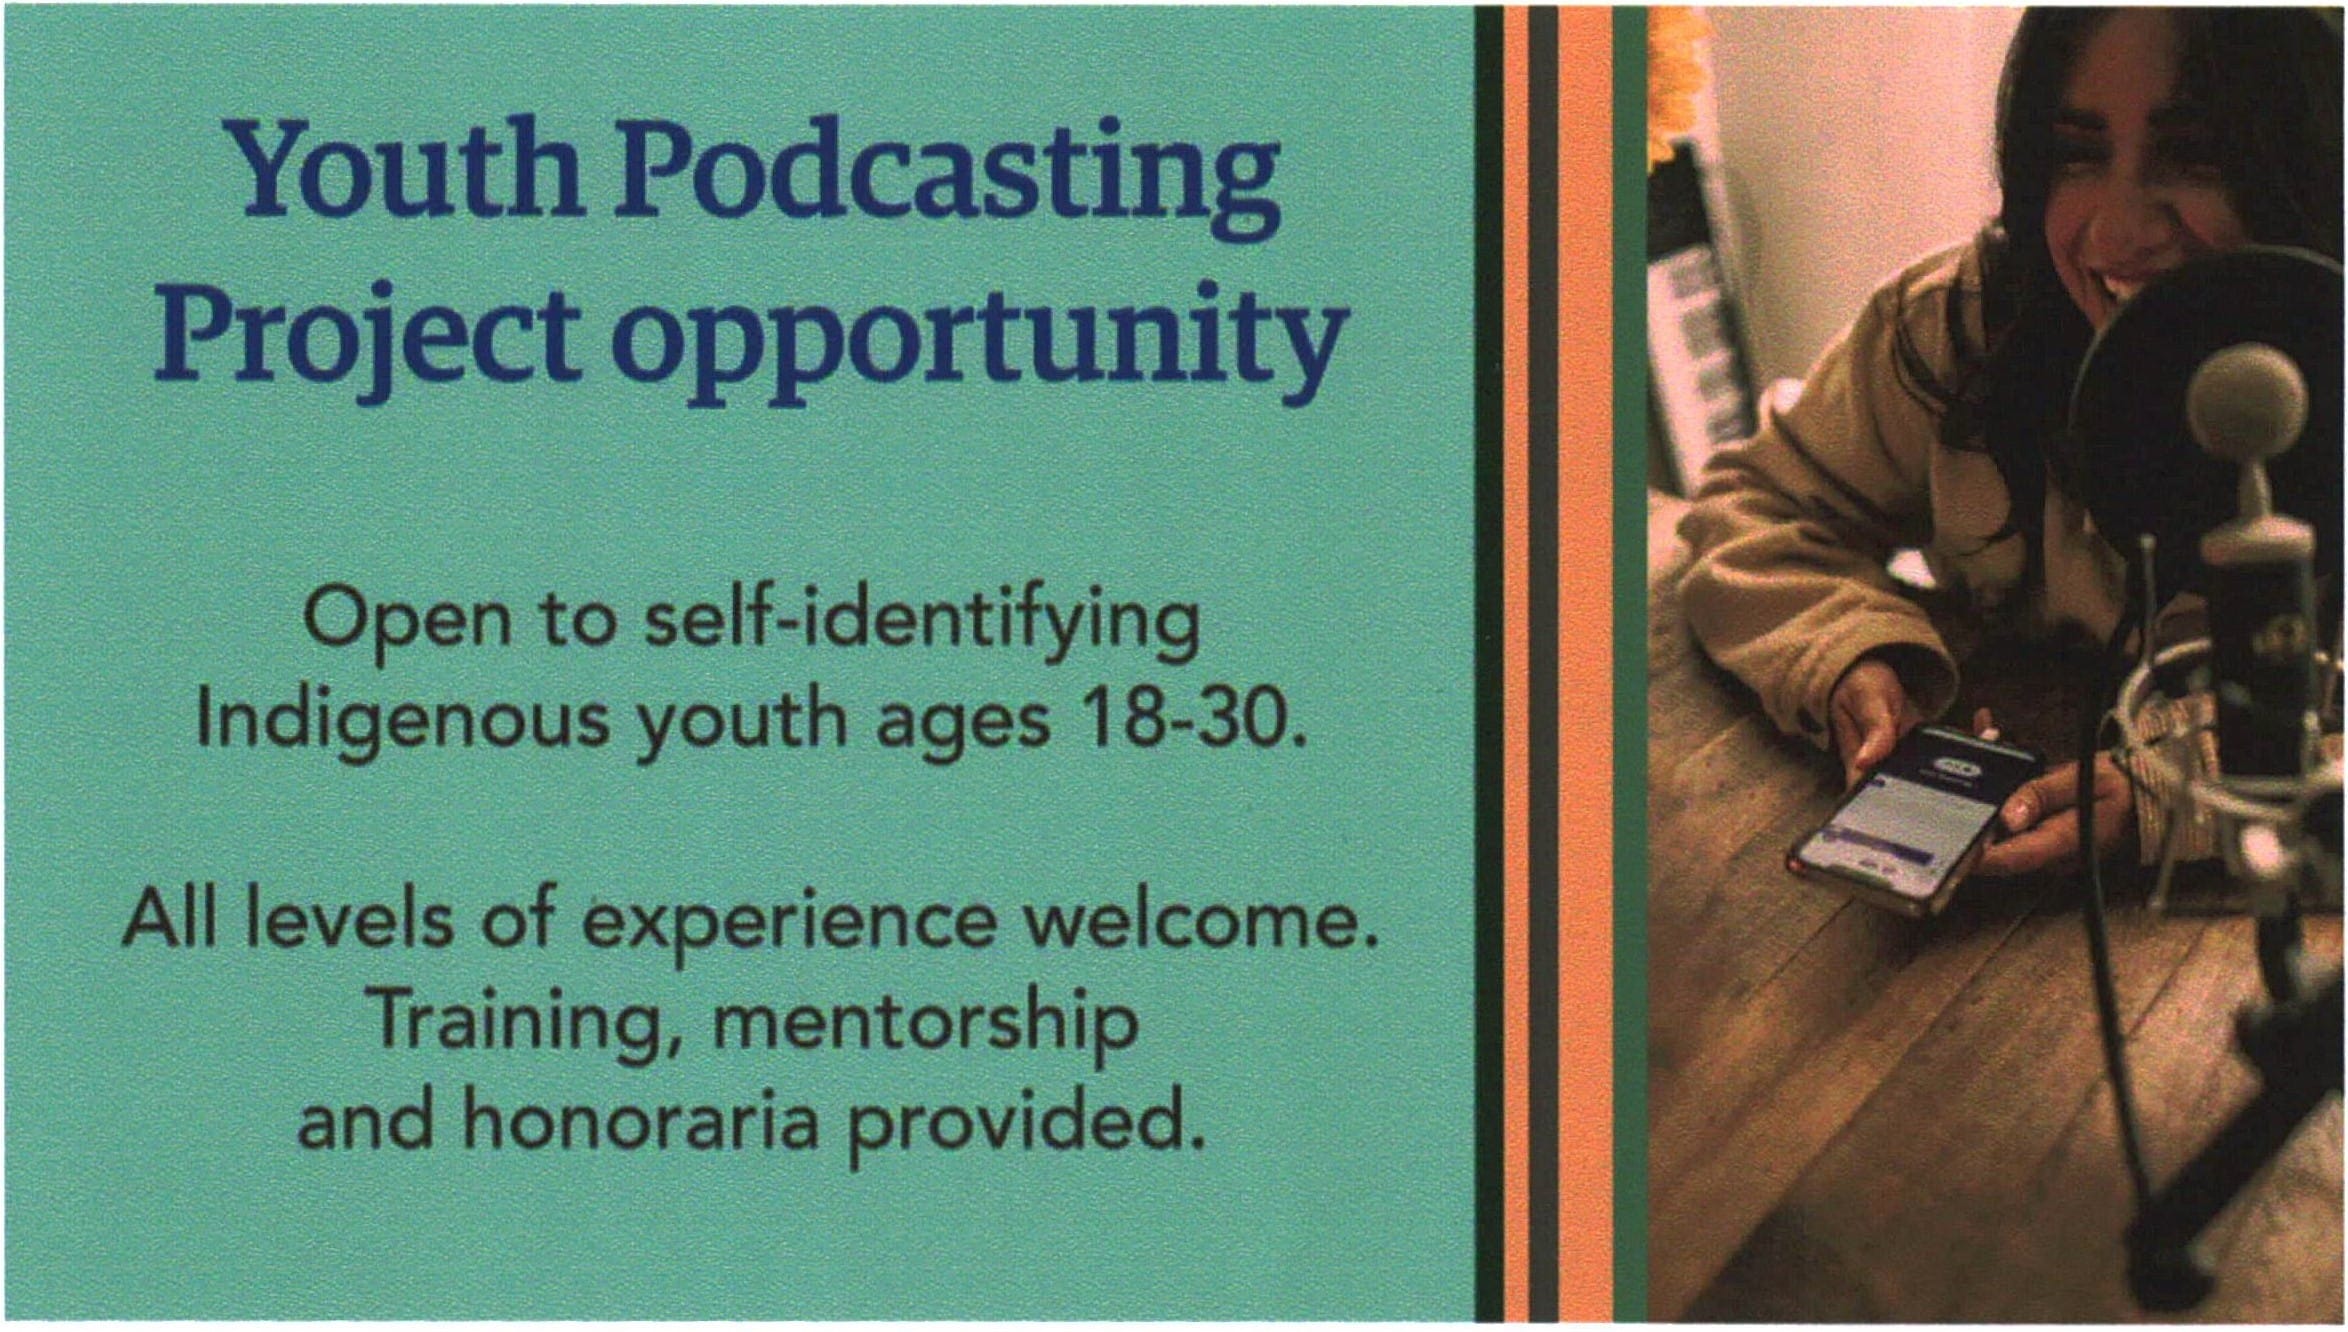 UBC Youth Podcasting Opportunity